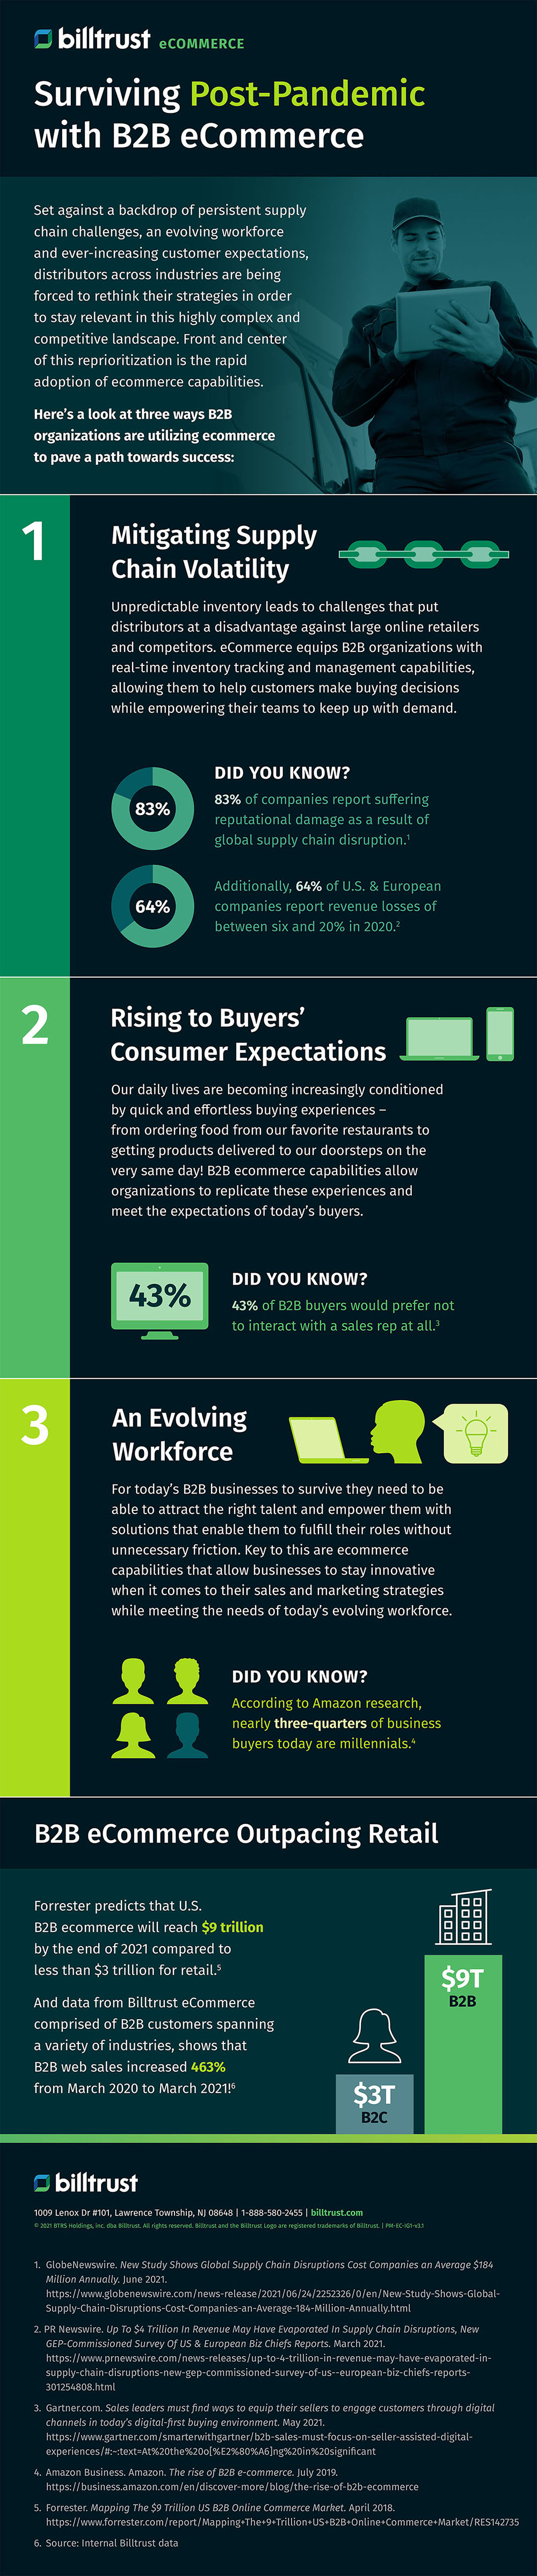 billtrust infographic surviving post pandemic with b2b ecommerce